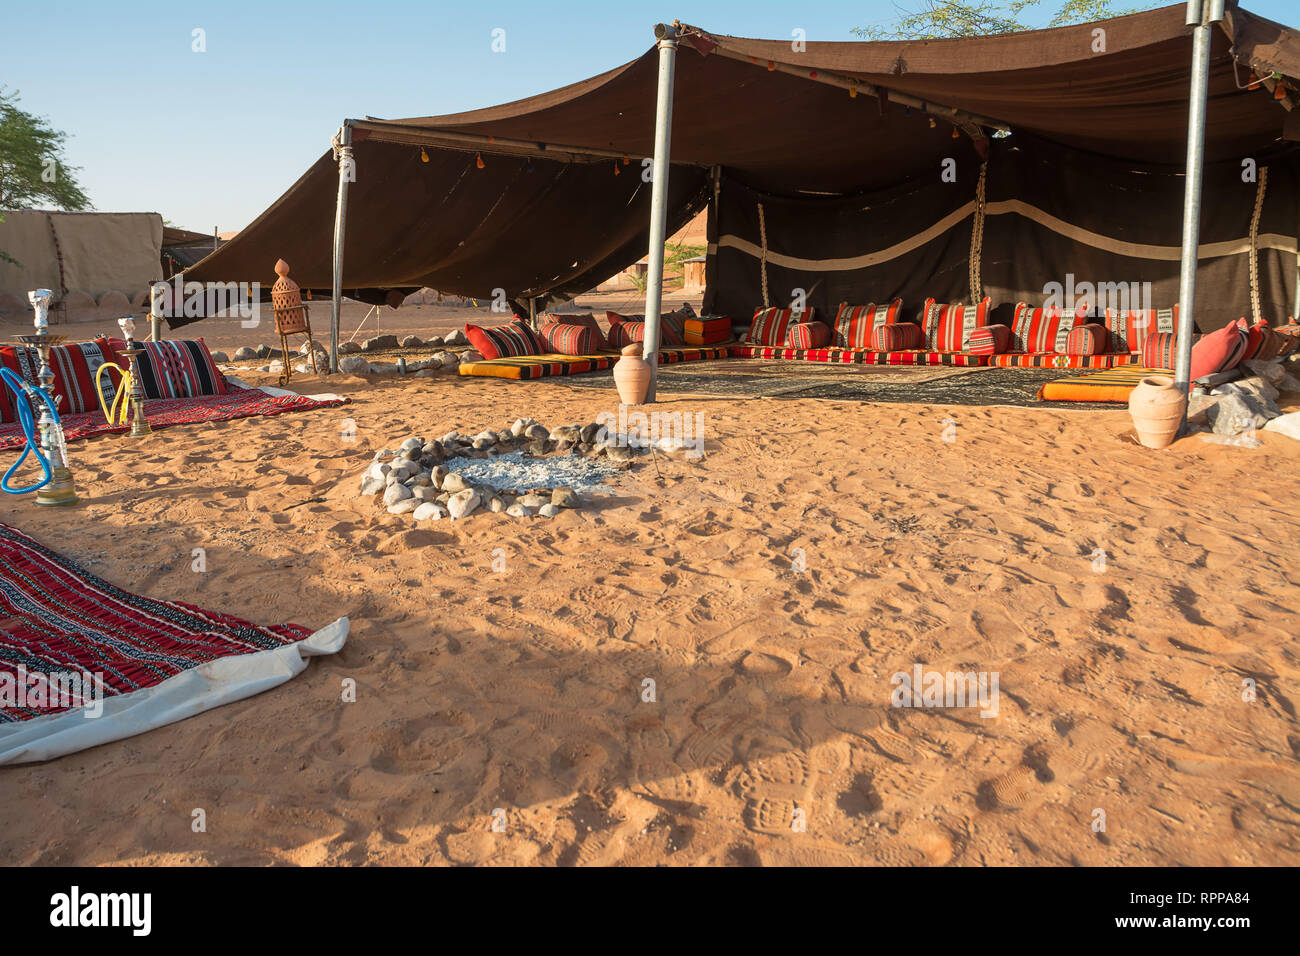 Bedouin tent in the Wahiba Sand Desert in the morning (Oman) Stock Photo